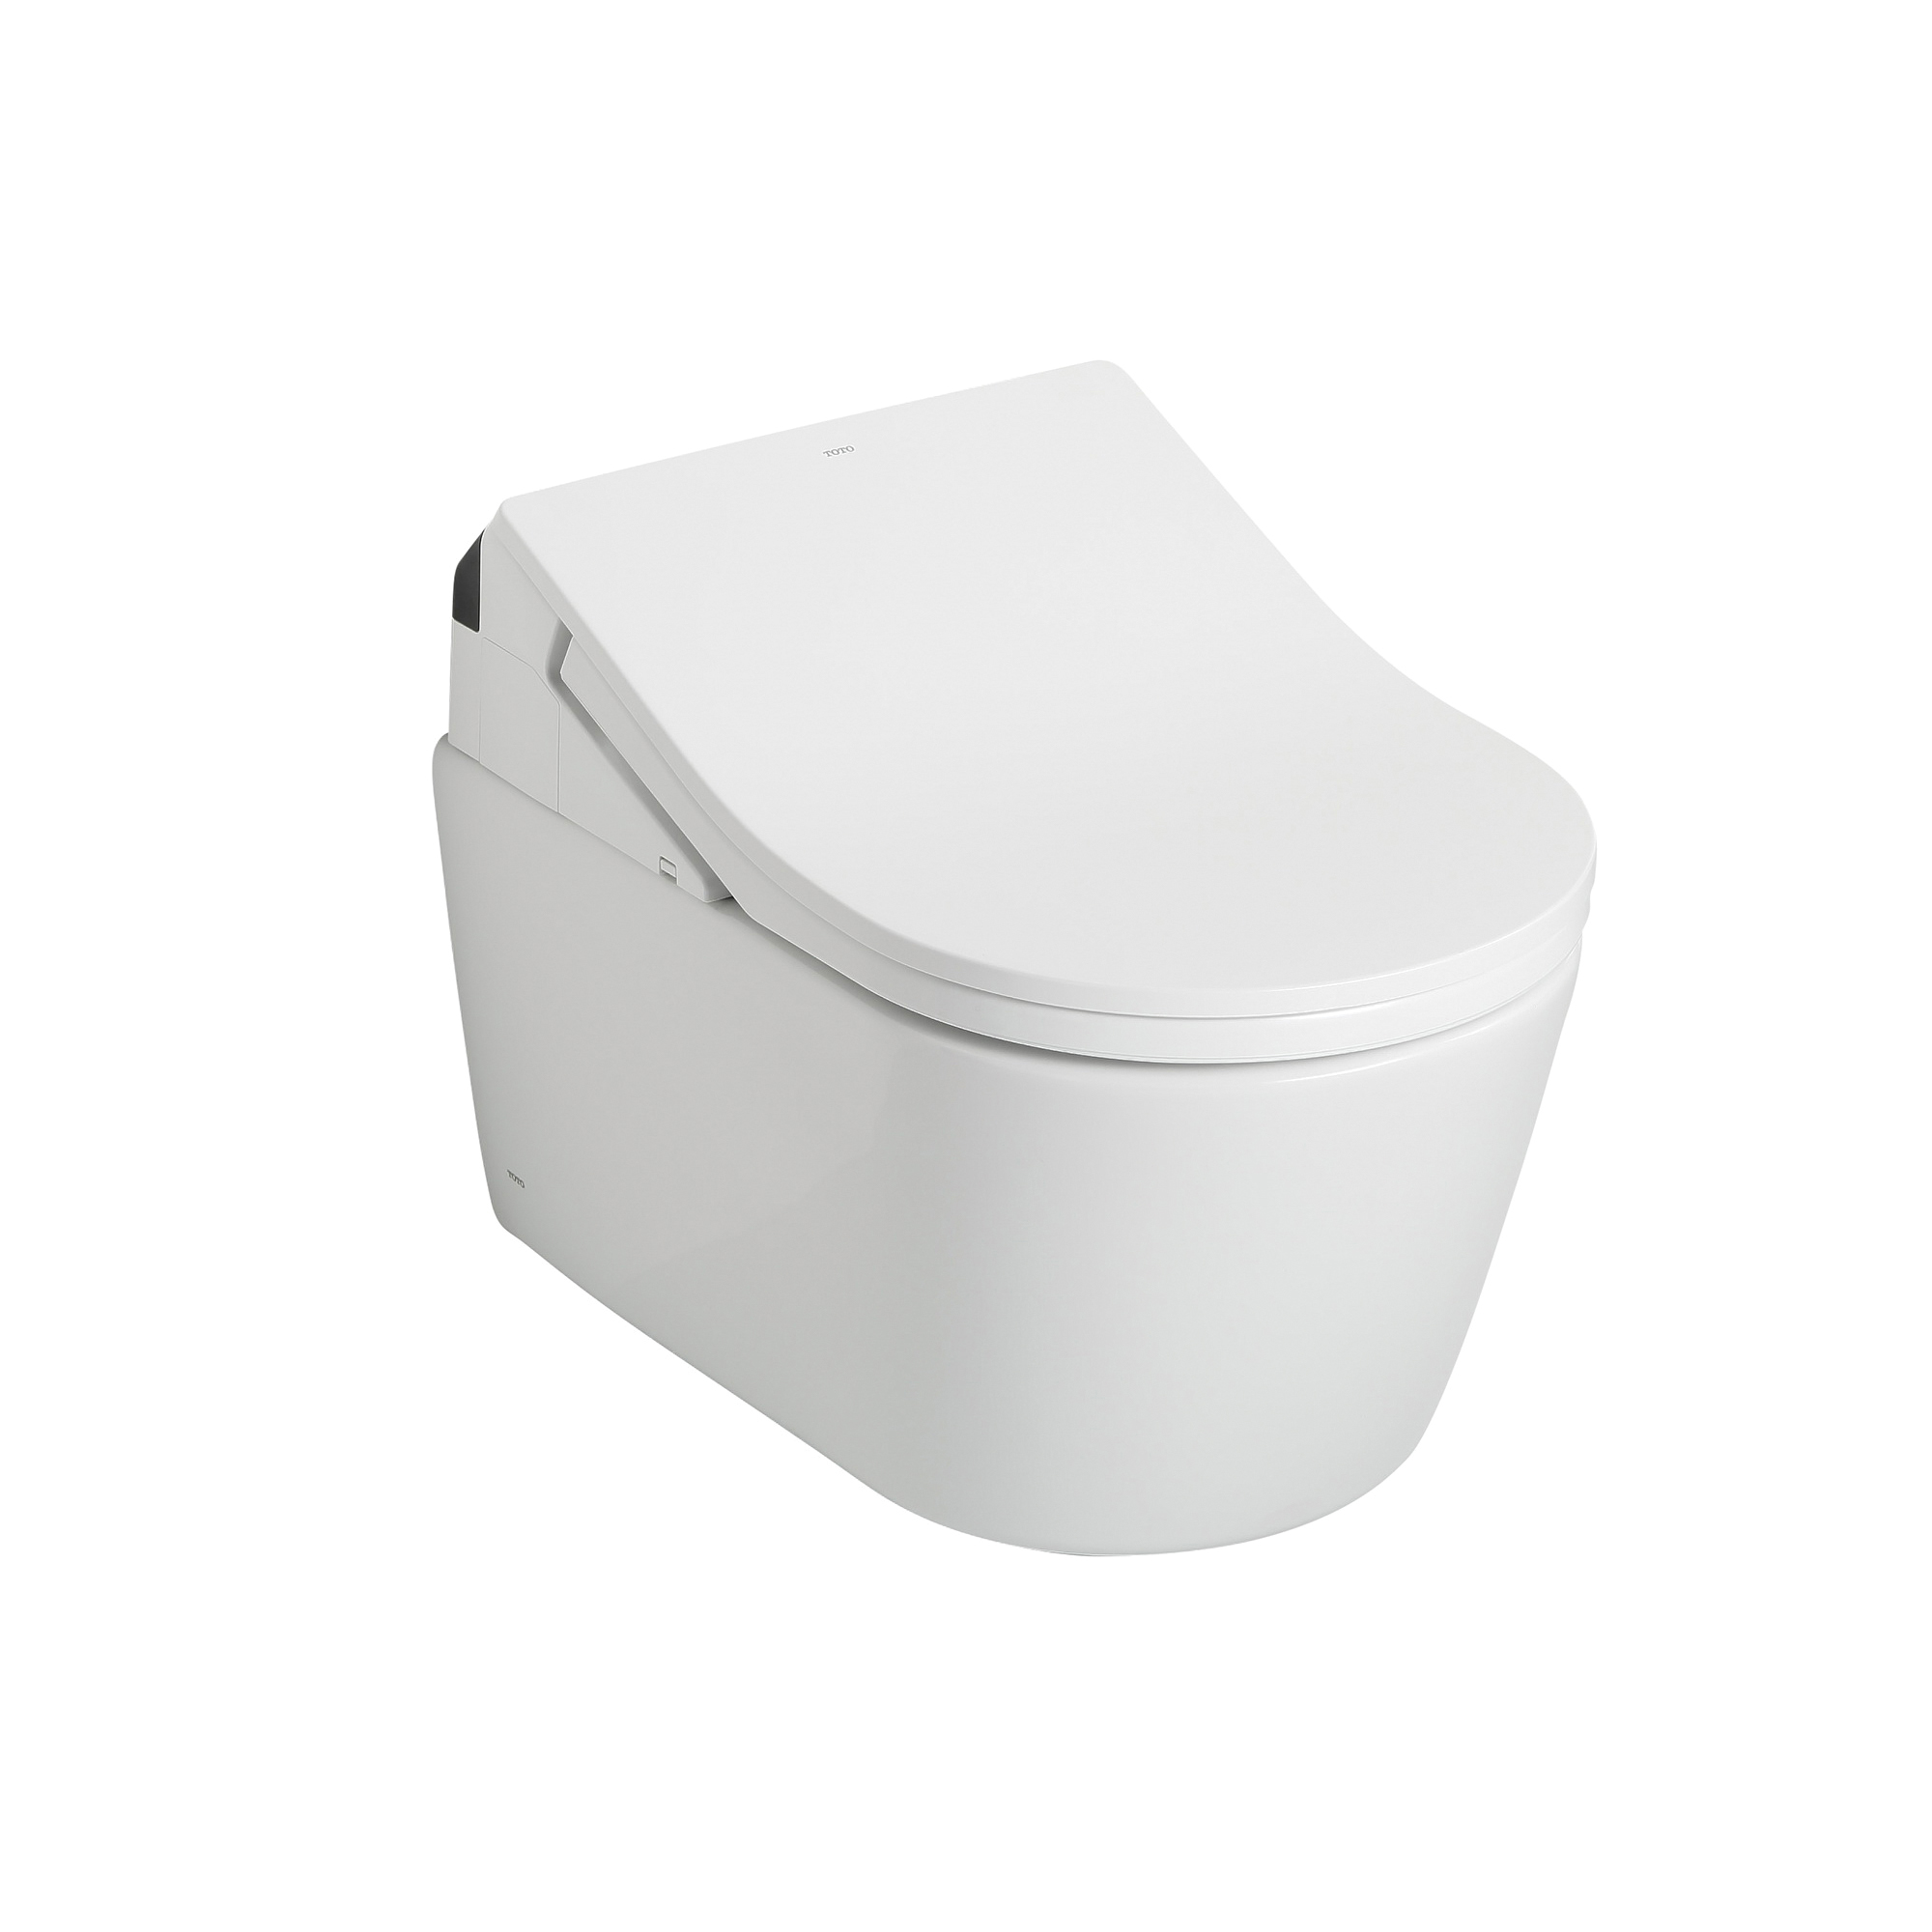 Toto® CWT4474047CMFGA#MS Skirted Design Toilet With CEFIONTECT® Ceramic Glaze, Elongated Bowl, 16-1/8 in H Rim, 0.9/1.28 gpf, Matte Silver, Import